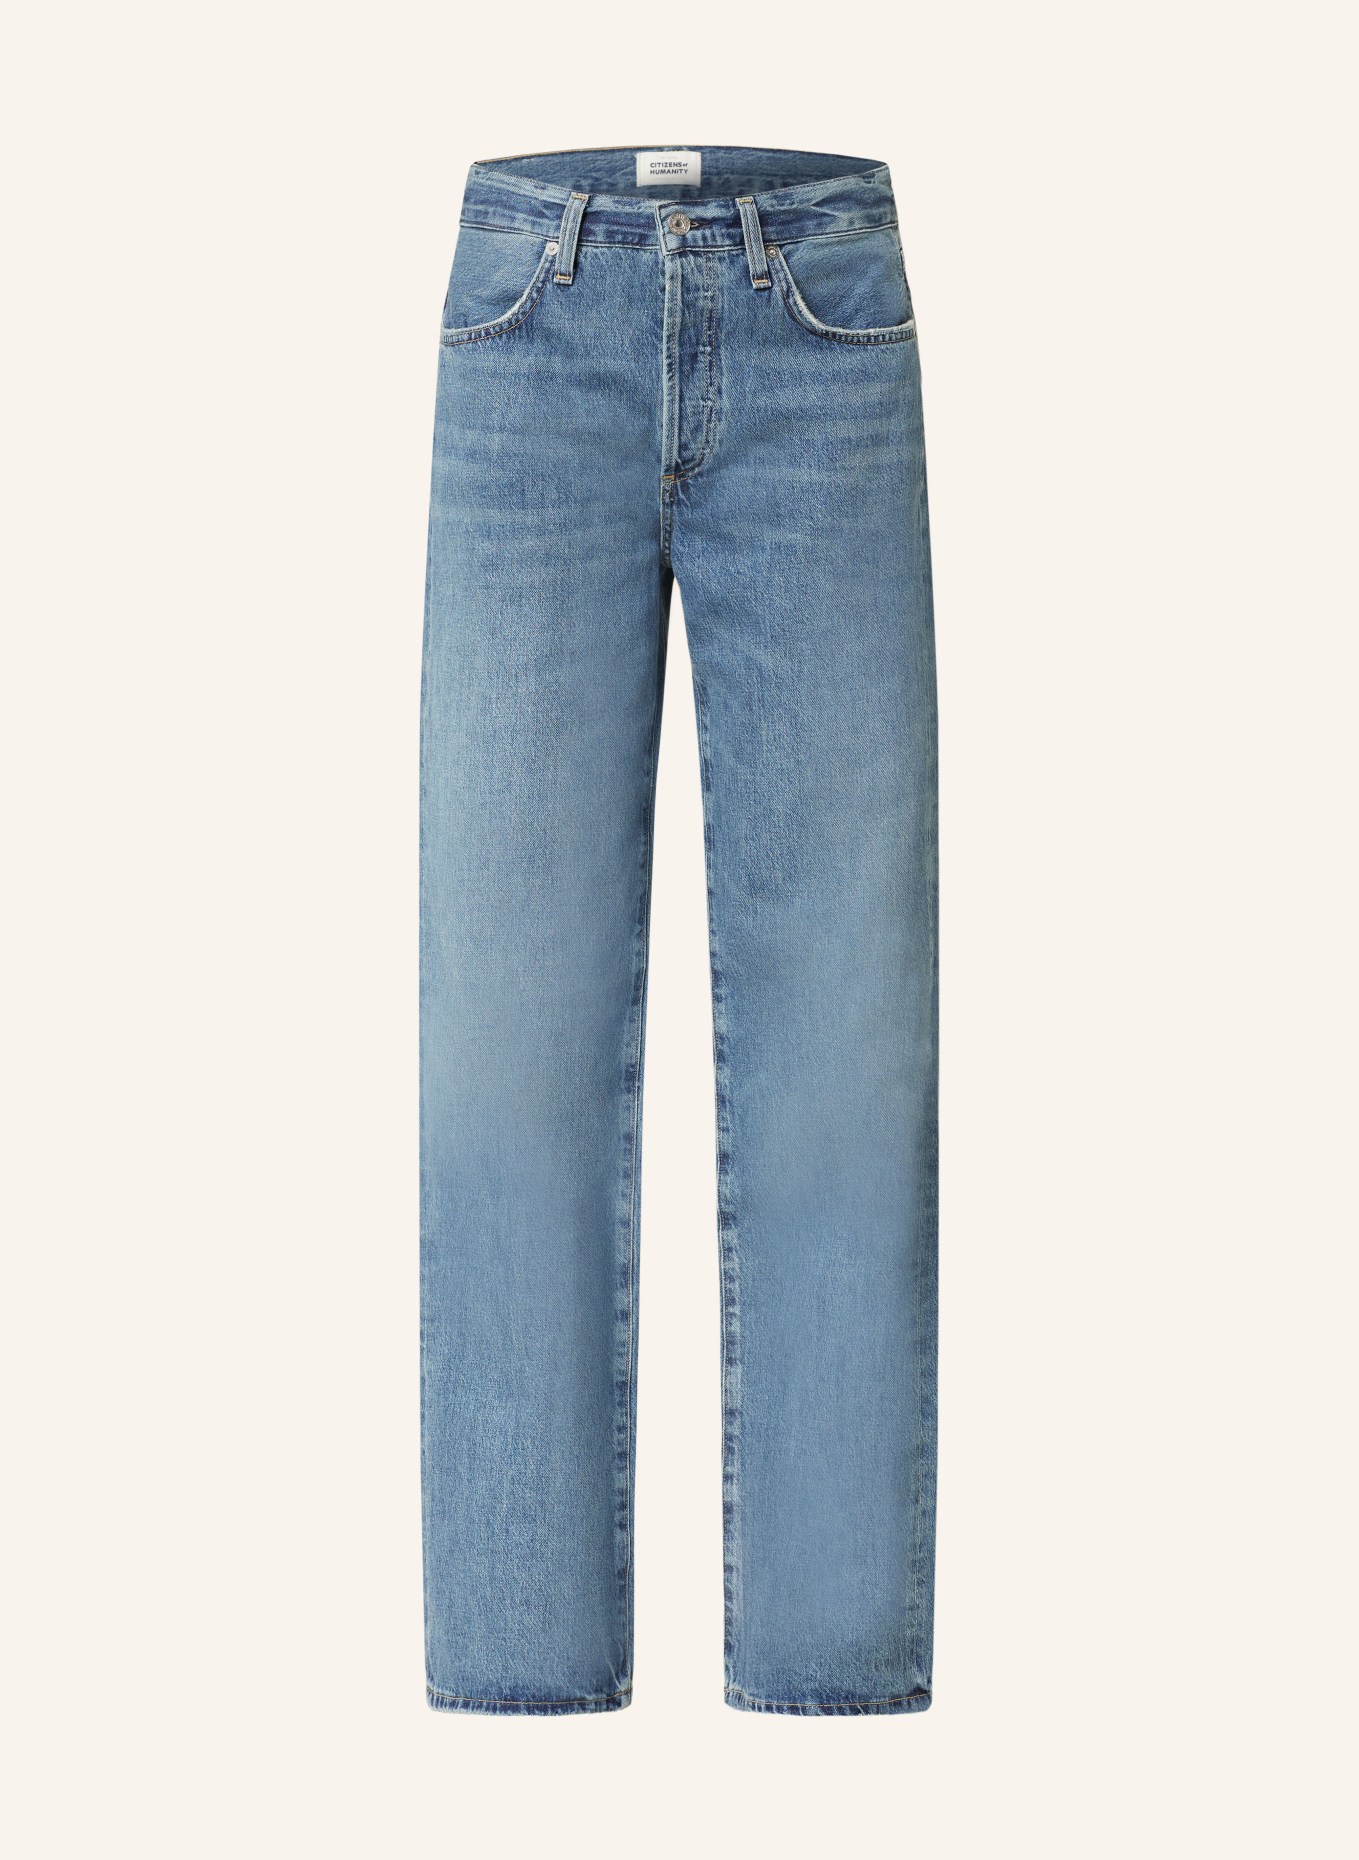 CITIZENS of HUMANITY Flared jeans ANNINA, Color: starsign med ind (Image 1)